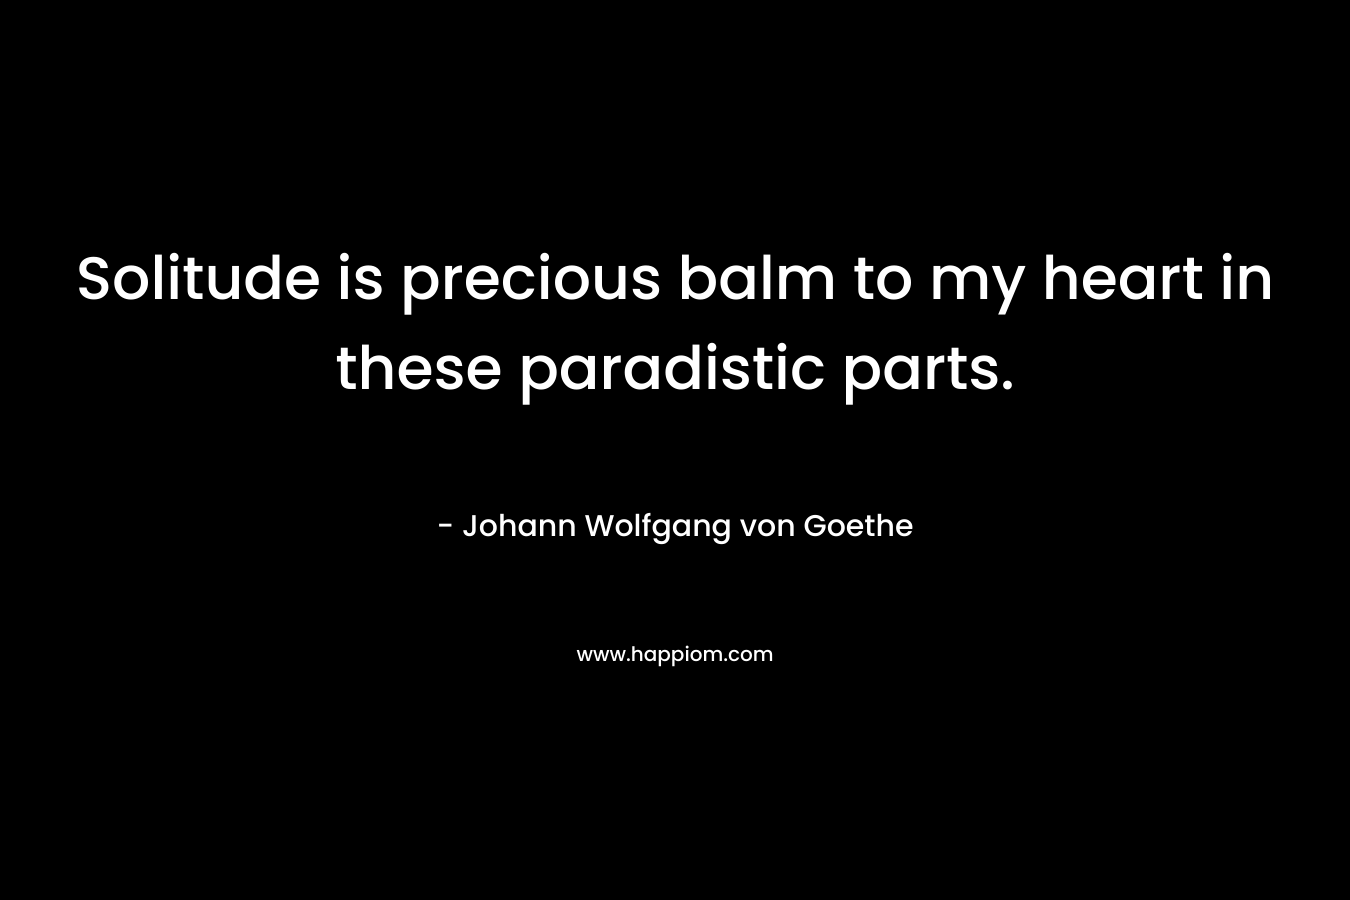 Solitude is precious balm to my heart in these paradistic parts.